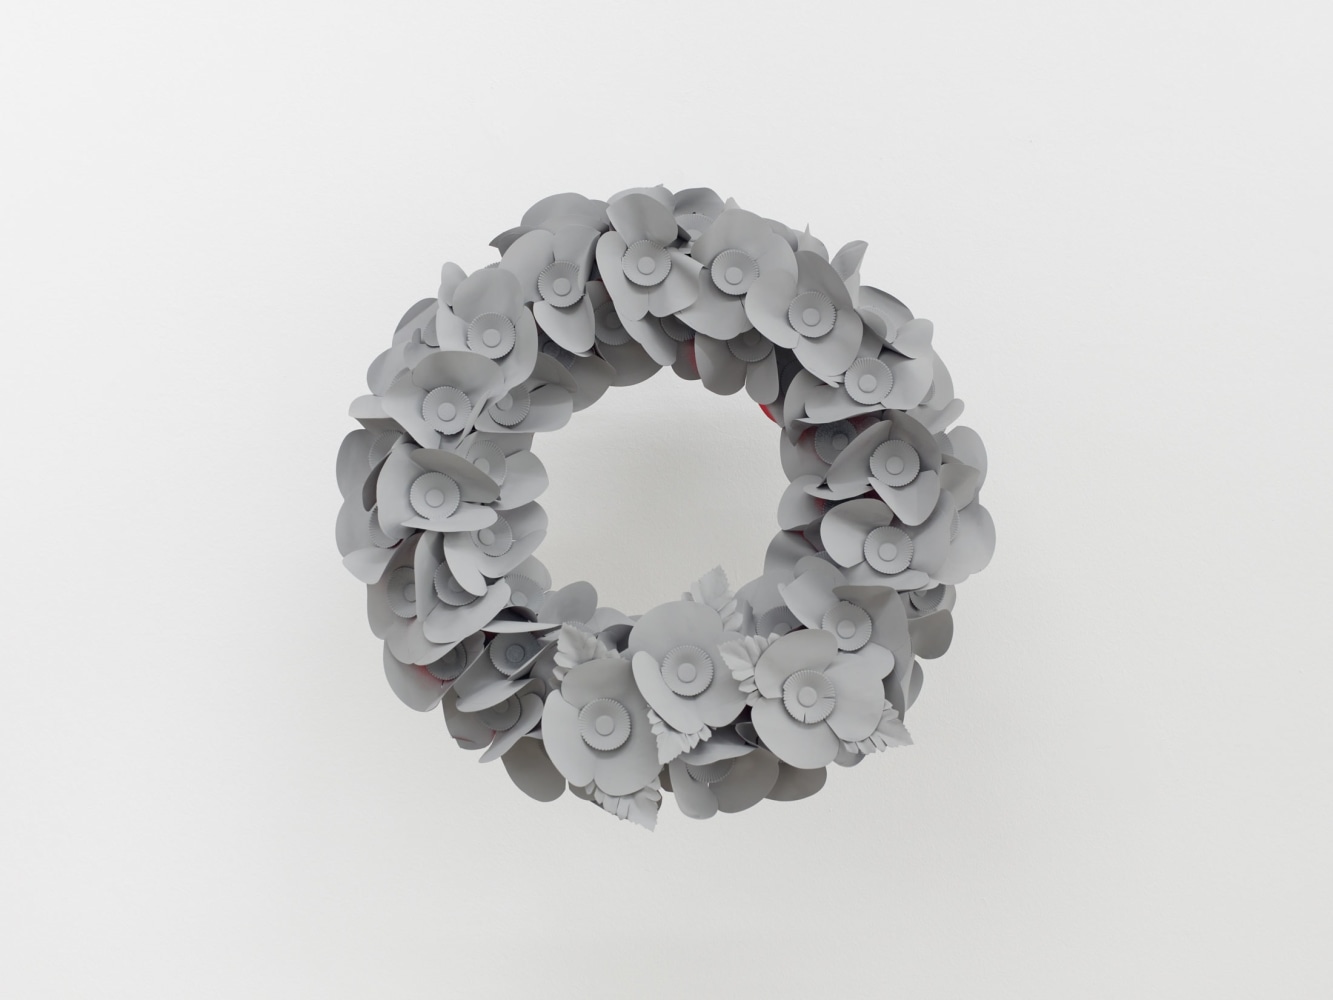 Camilla Wills
Anti-imperial Monochromes, 2021
Five Royal British Legion poppy wreaths, signal grey paint
Each: 15 3/4 x 15 3/4 x 12 5/8 inches (40 x 40 x 32 cm)
&amp;copy; Camilla Wills; Courtesy of the artist, d&amp;eacute;pendance, Brussels, and Luhring Augustine, New York.
Photo&amp;nbsp;by Kristien Daem.